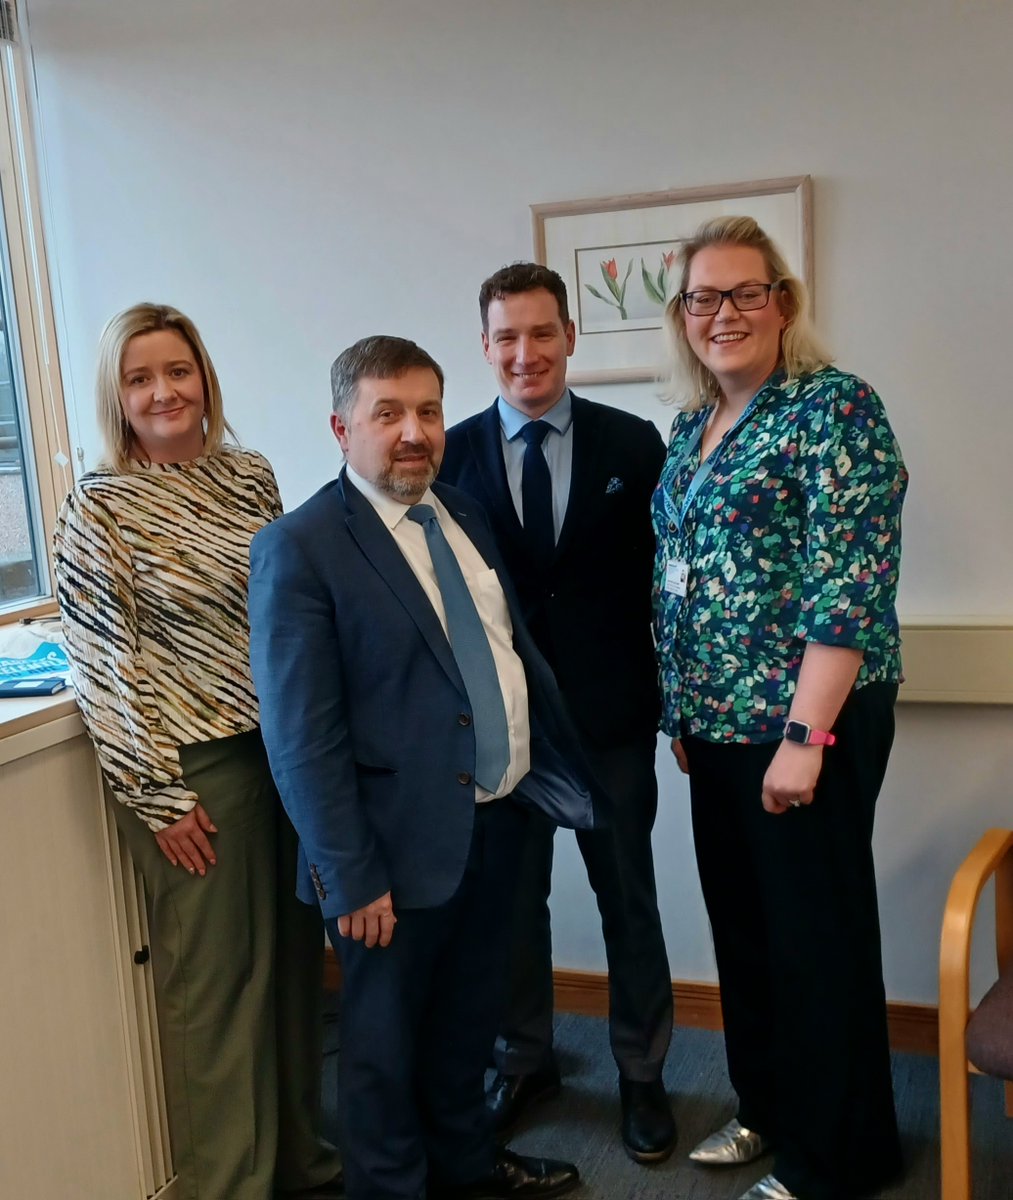 NINCA were delighted to meet Health Minister @RobinSwann_MLA to discuss the neurology review. Neurology services are straining and need a sustainable plan for the future. This review is crucial and we're committed to working together for everyone with neurological conditions.